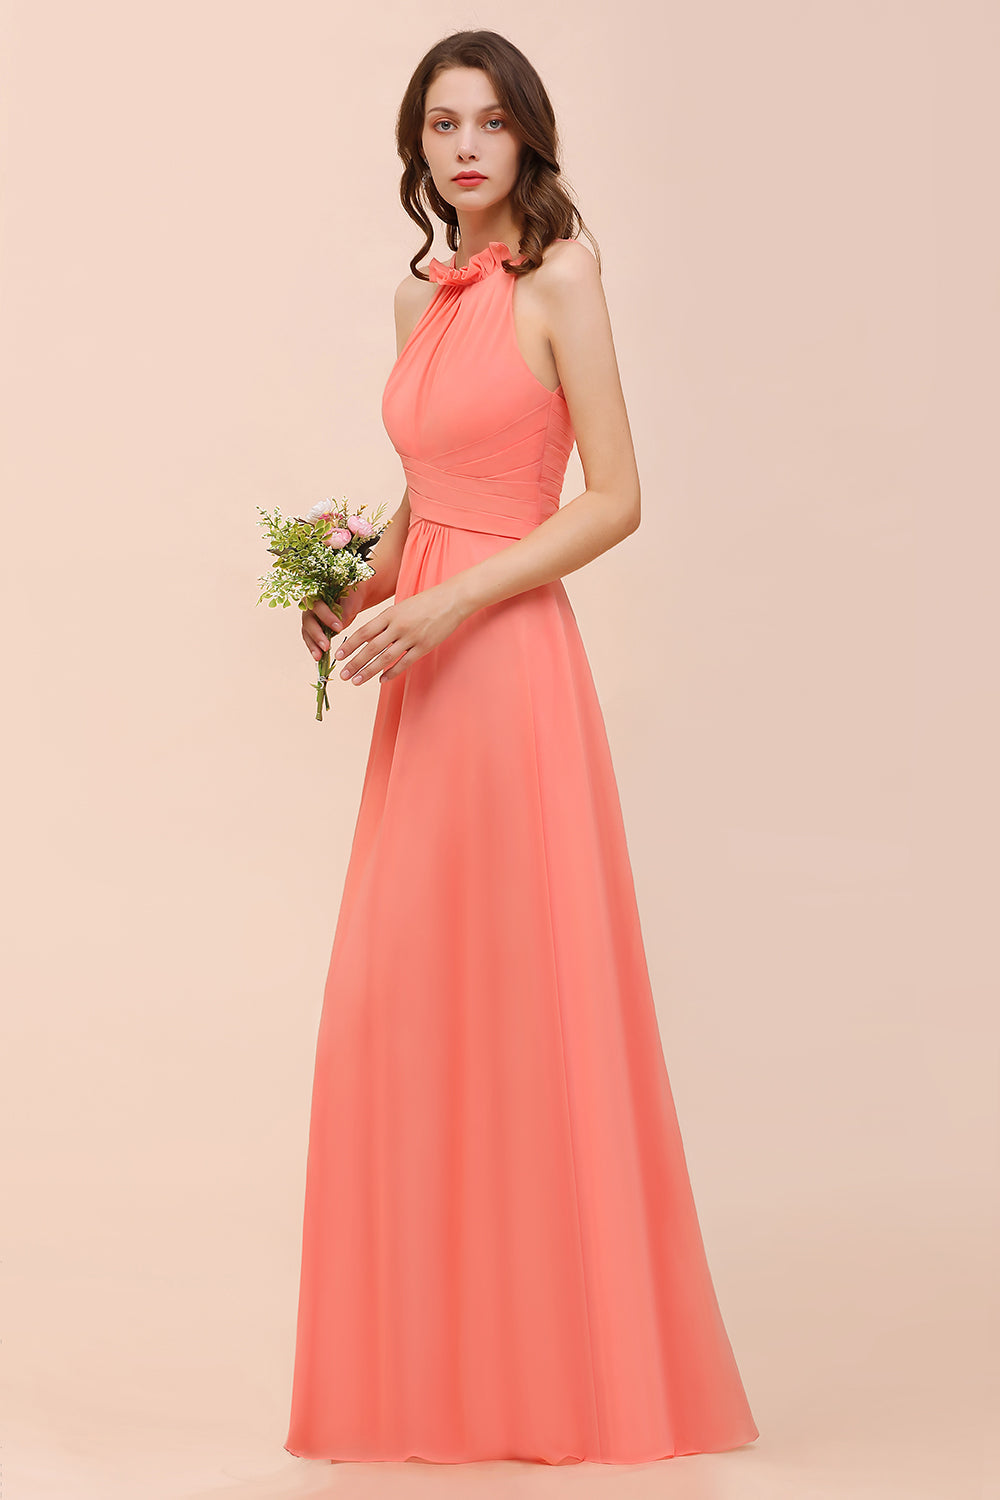 Load image into Gallery viewer, Charming Long Chiffon A-Line Halter Coral Bridesmaid Dresses-BIZTUNNEL
